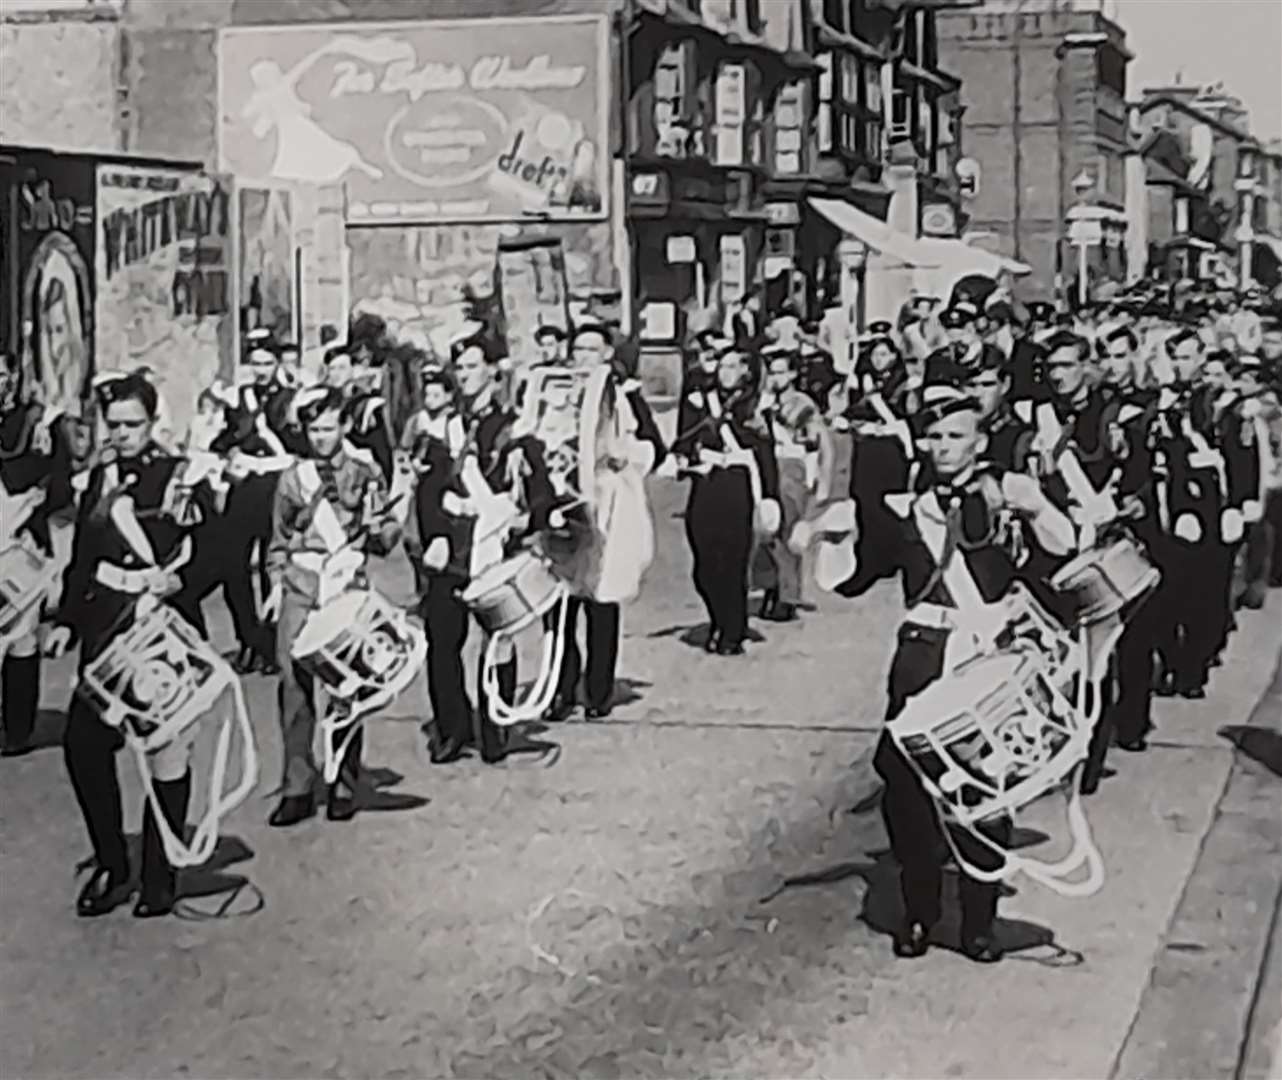 St John Ambulance band: Herne Bay review in 1950